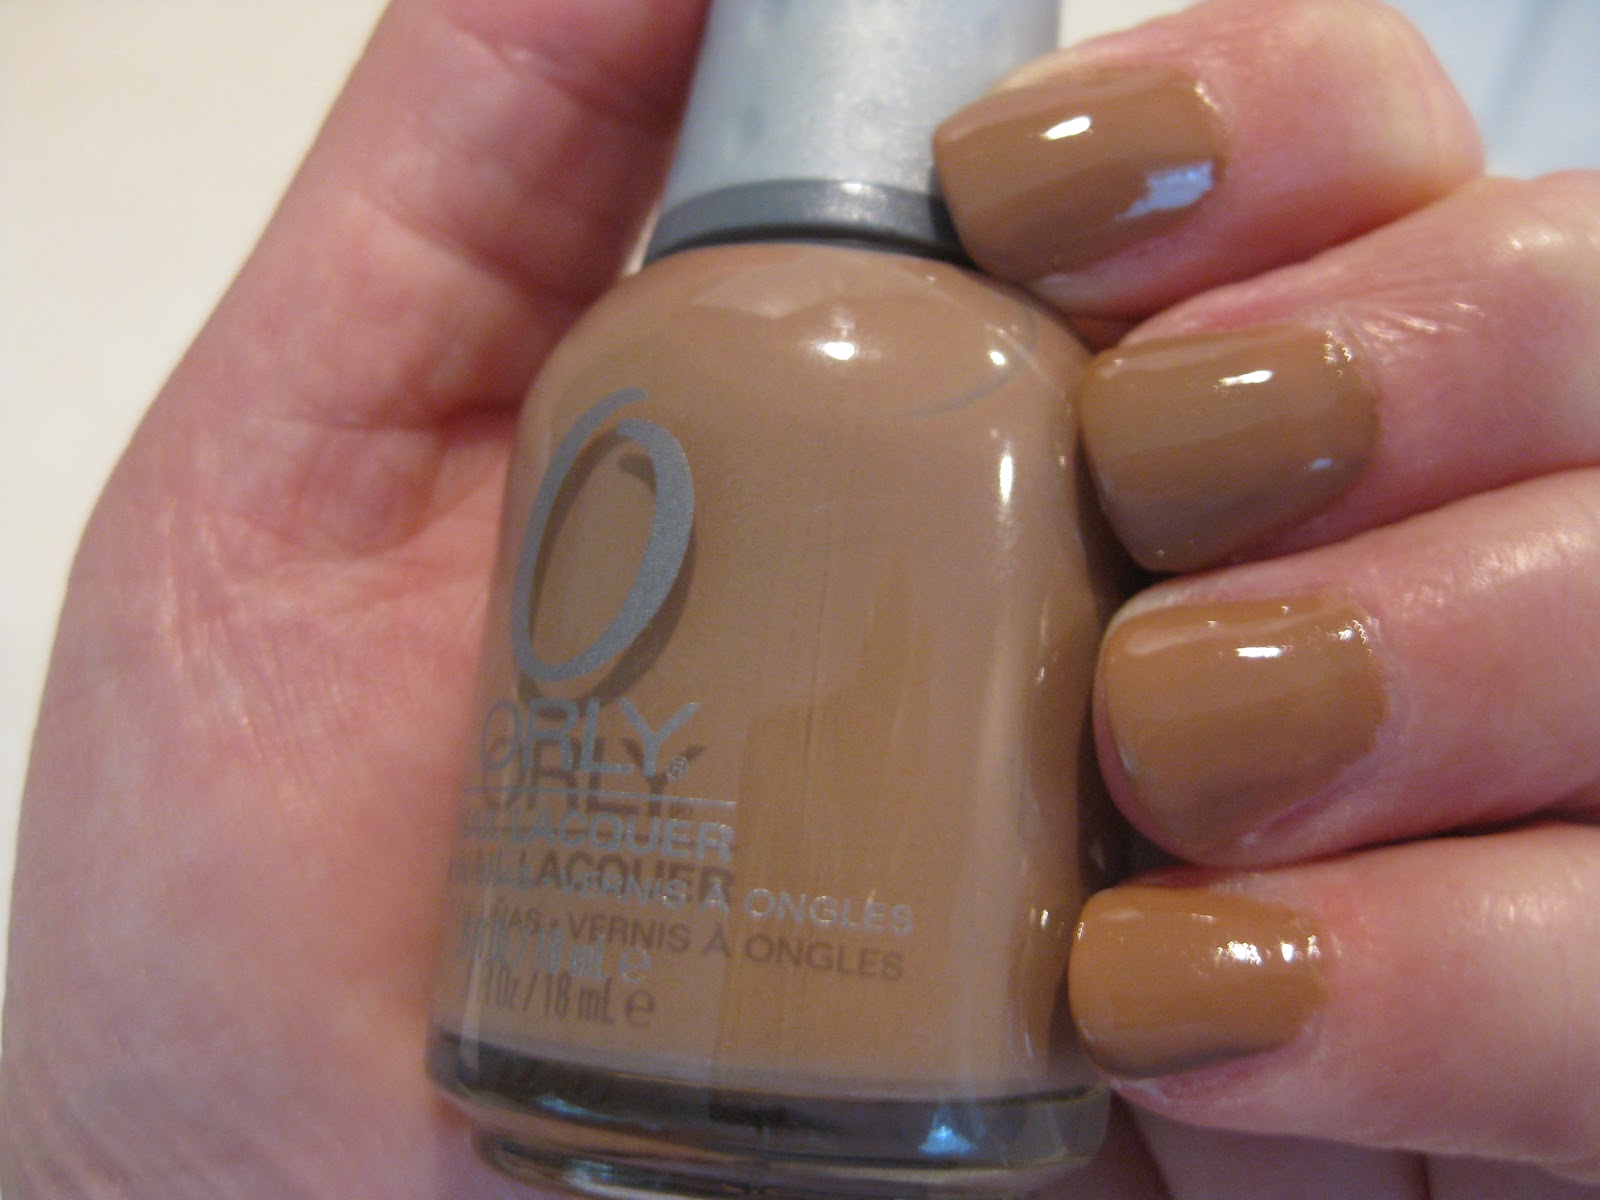 9. Orly Nail Lacquer in "Coffee Break" - wide 8